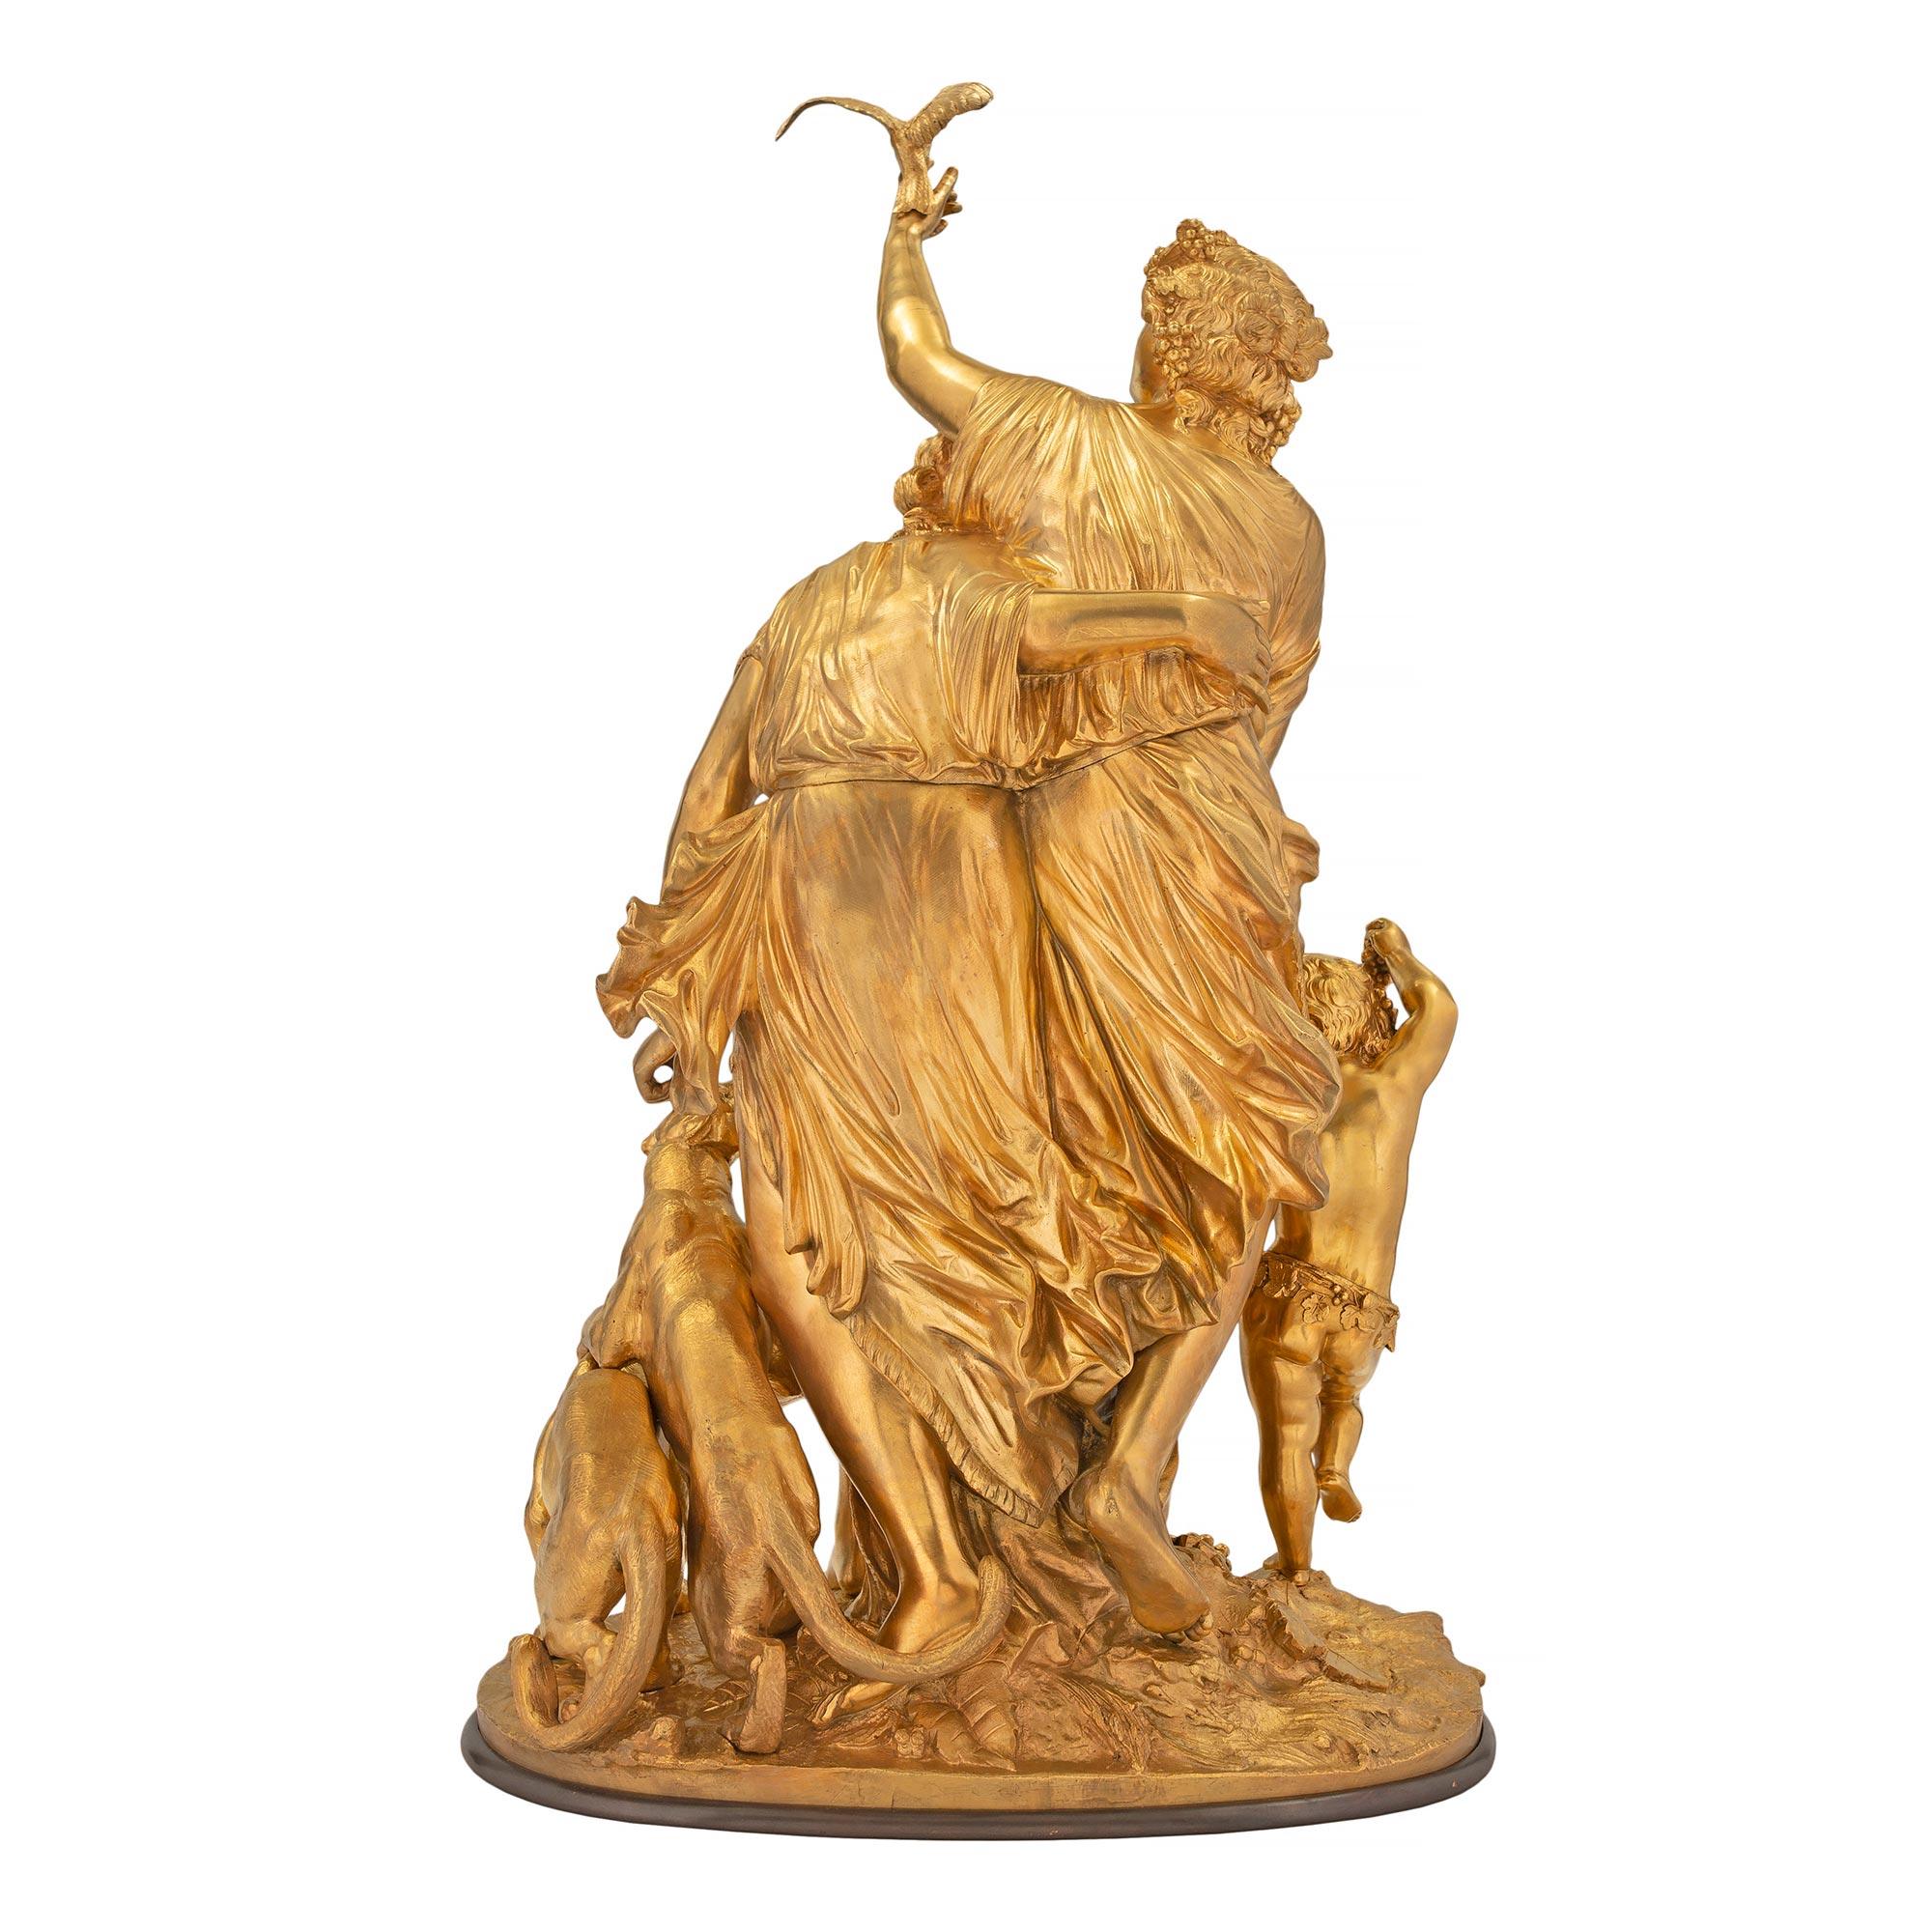 French Mid-19th Century Louis XVI Style Ormolu & Bronze Statue, Signed Delesalle For Sale 1